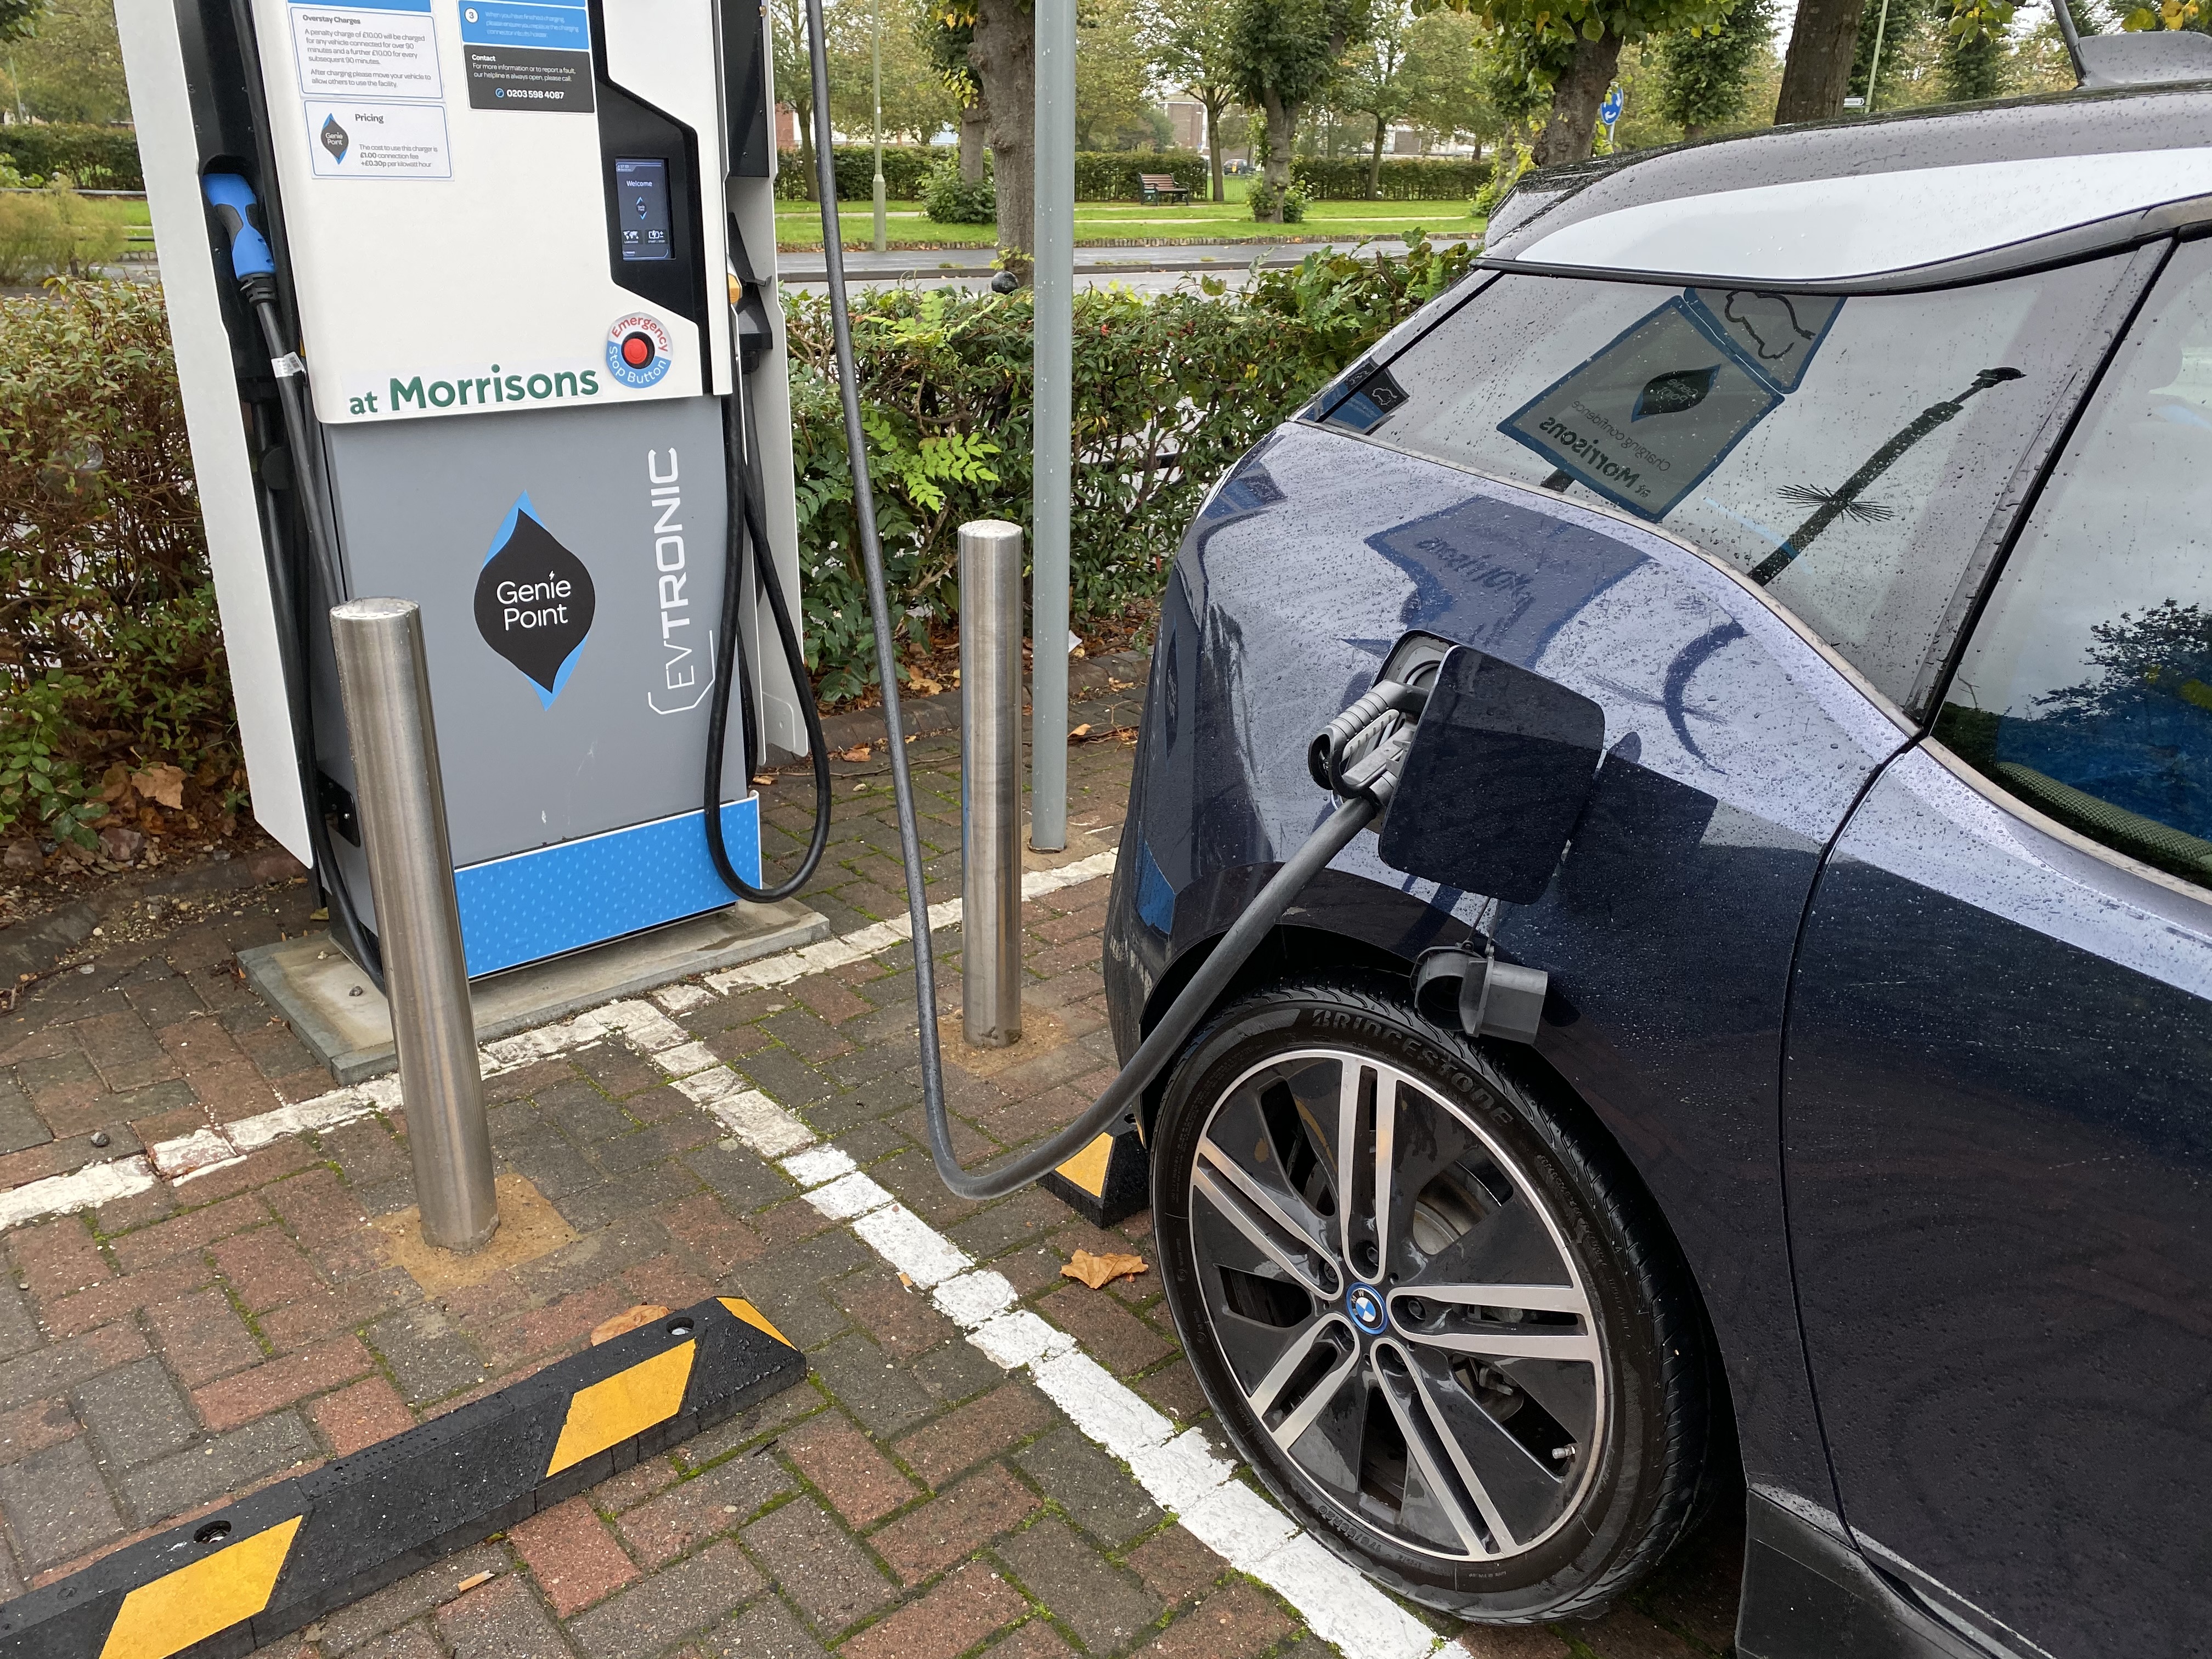 Increasing numbers of chargers mean plenty of opportunities to top up